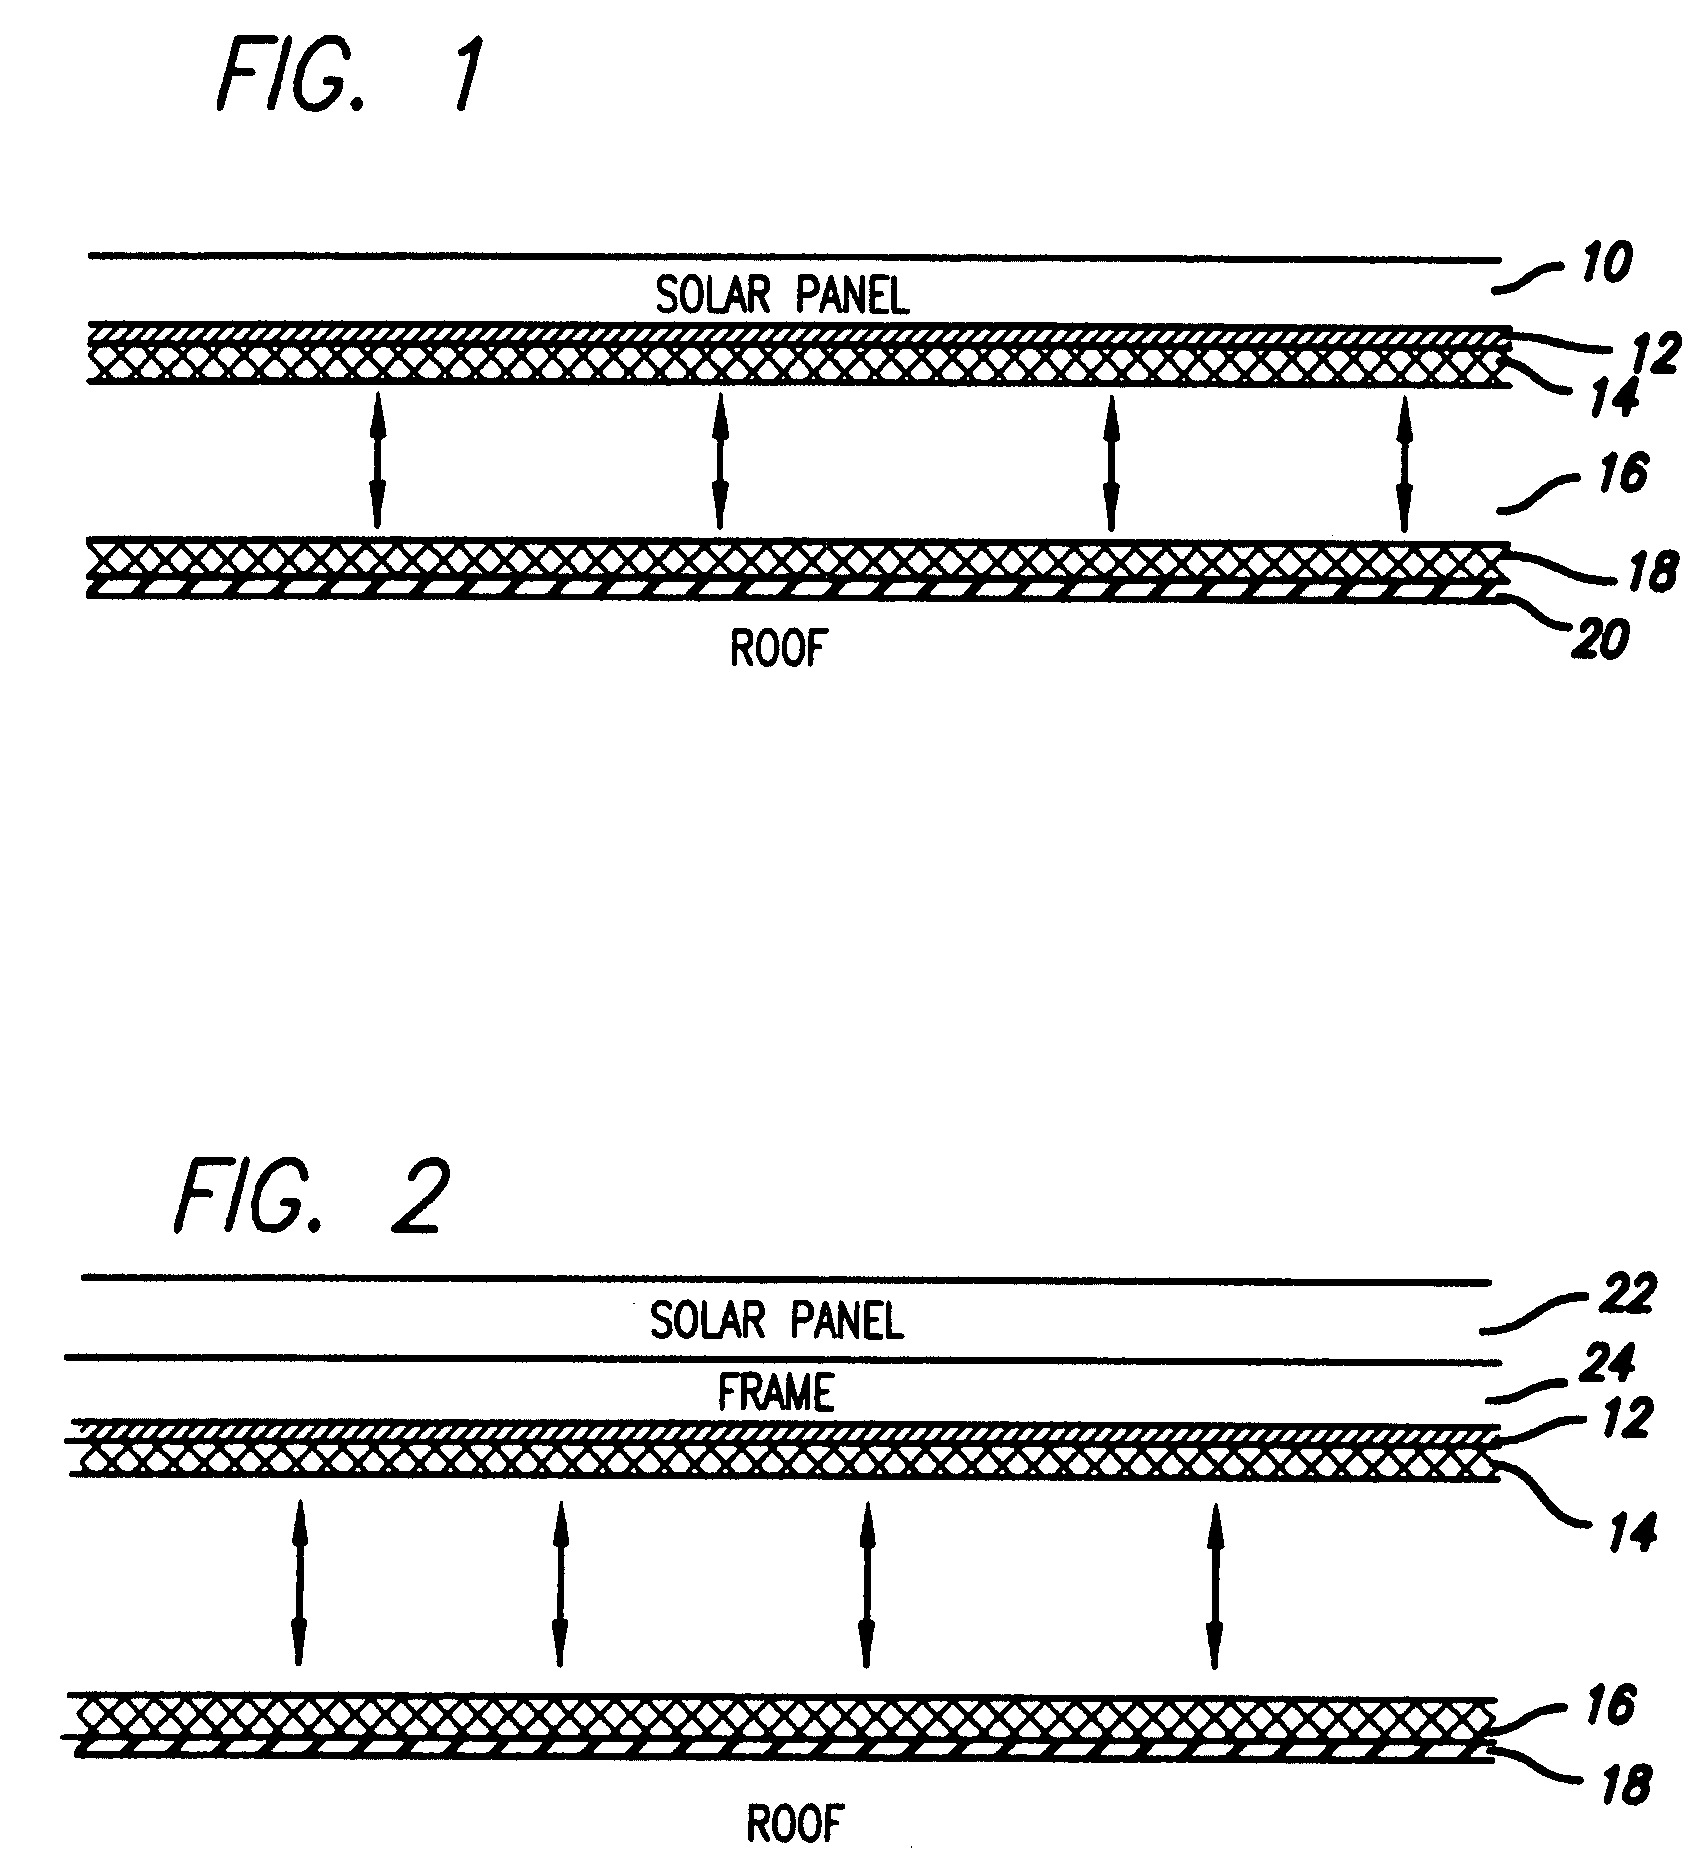 Apparatus and method for attaching solar panels to roof system surfaces